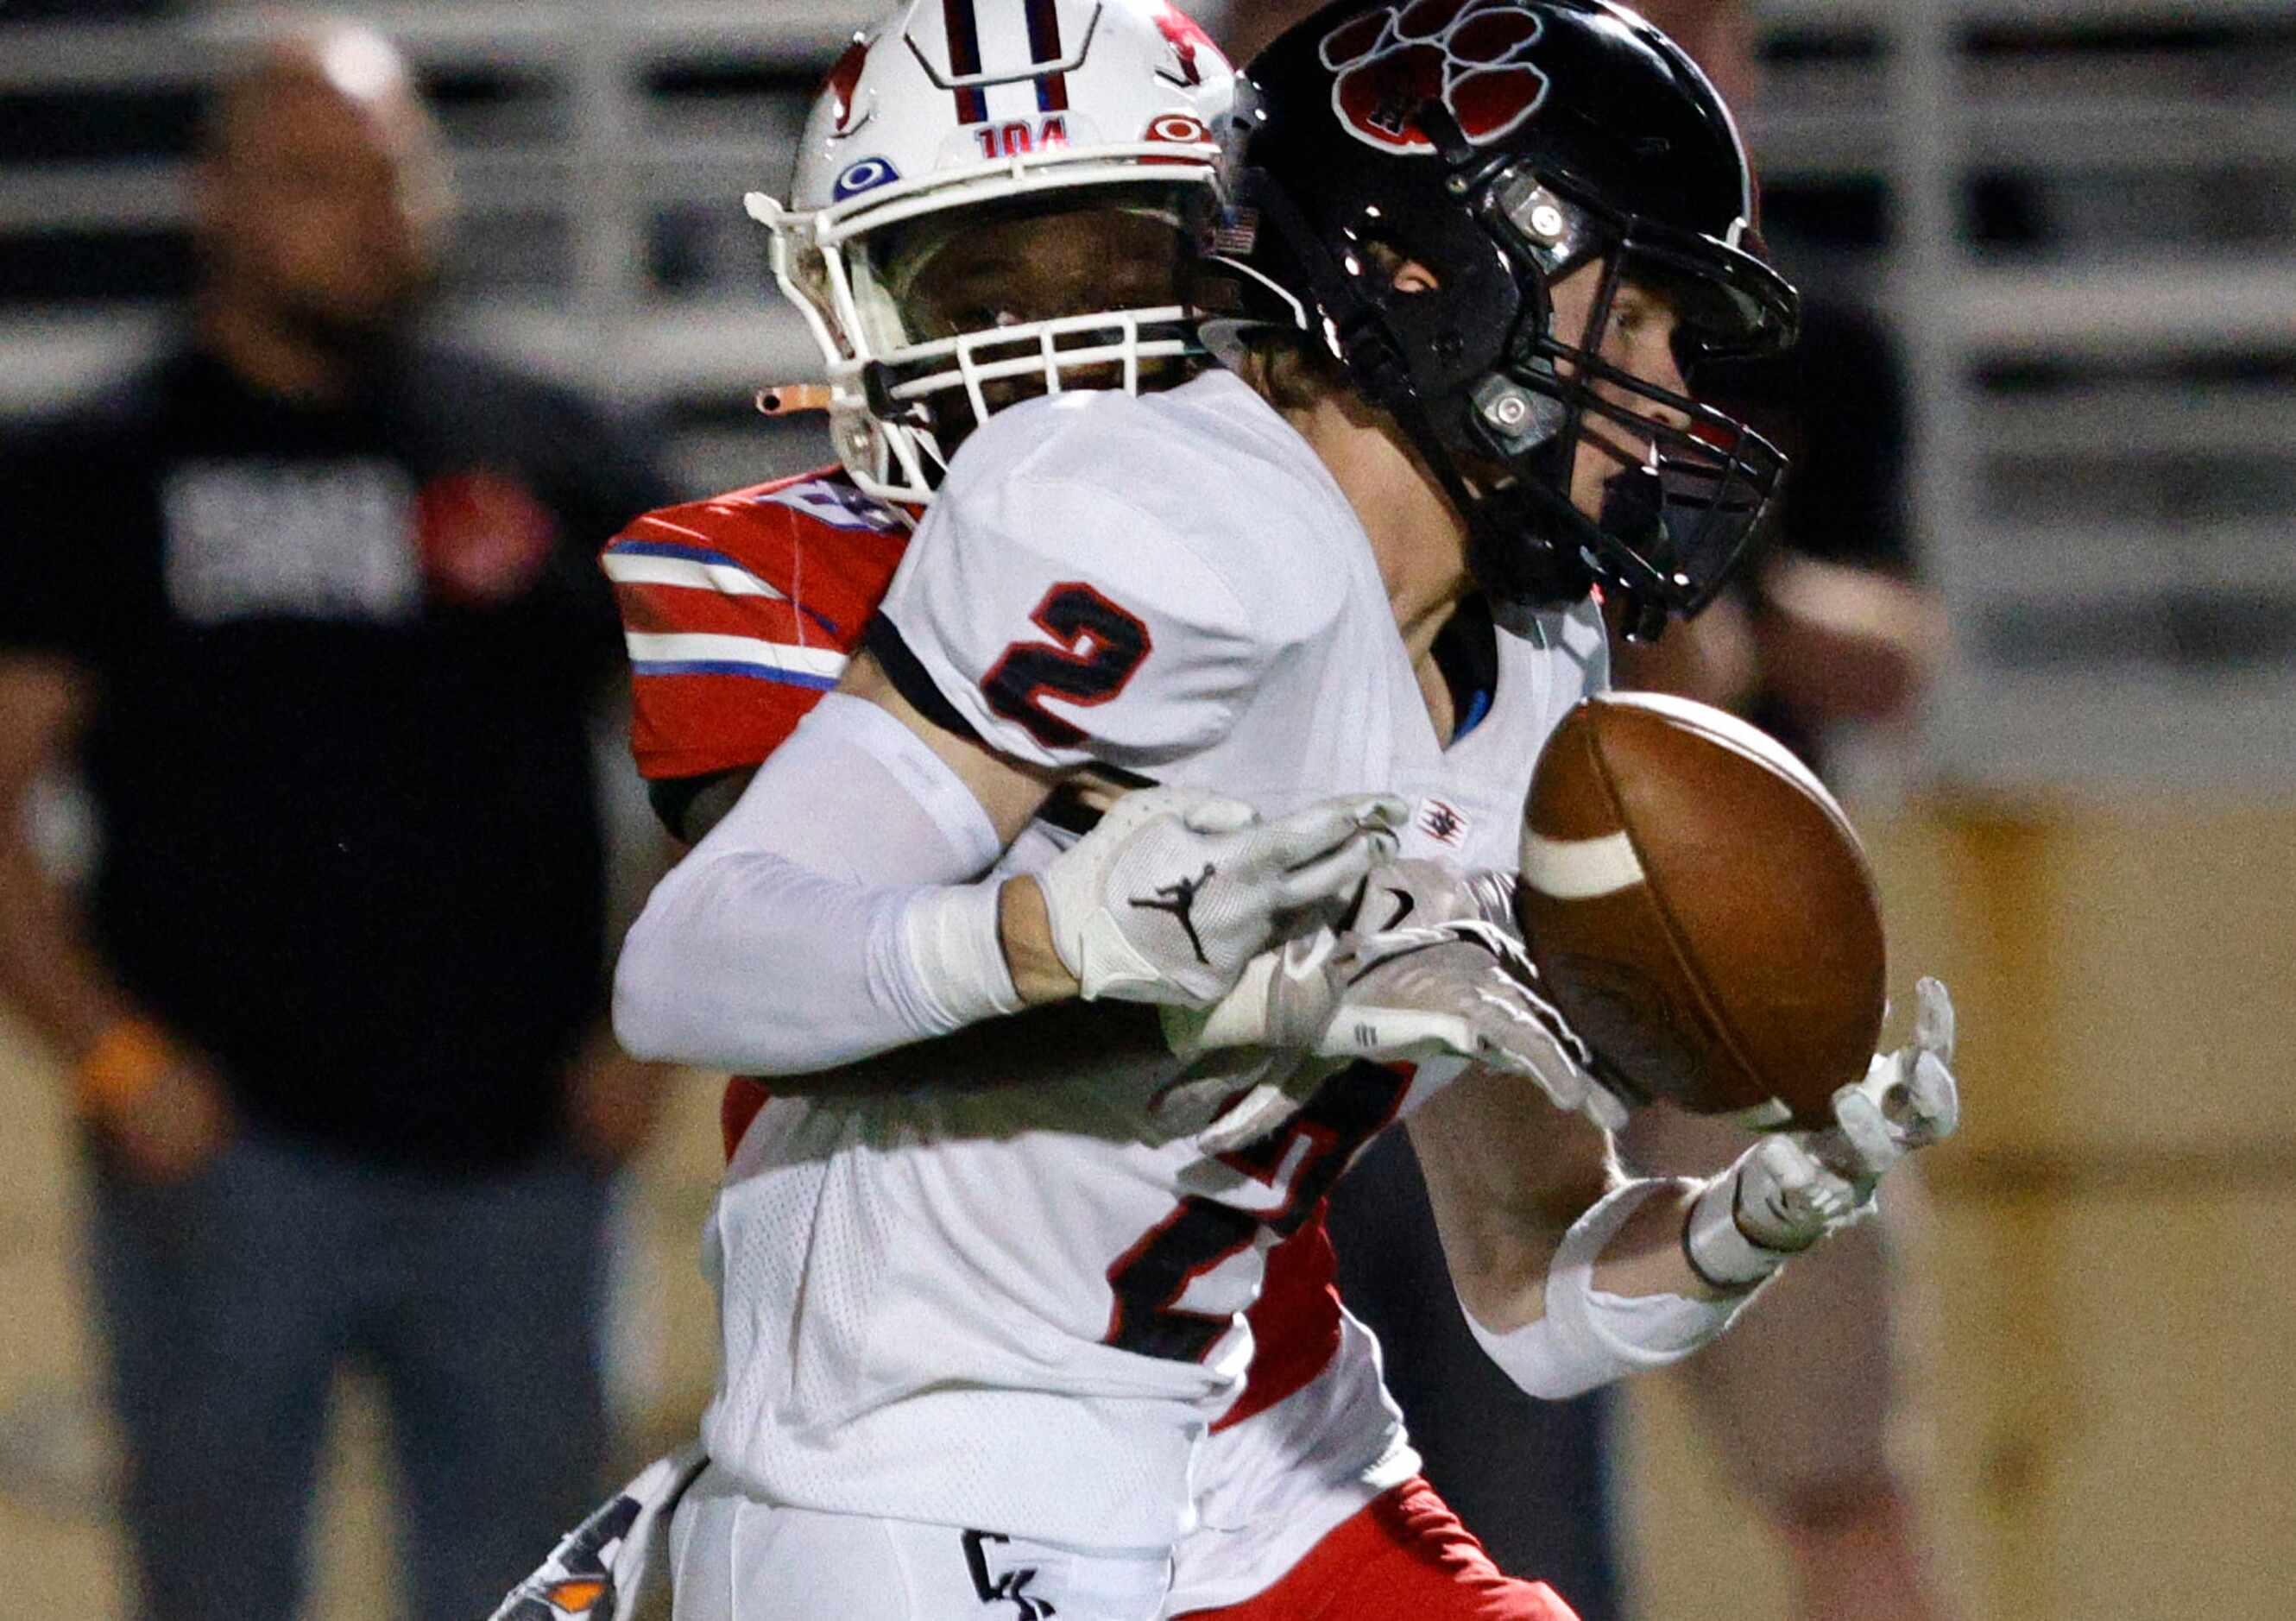 Colleyville Heritage's Zack Sogan (2) drops a ball under pressure from Grapevine's Ryan...